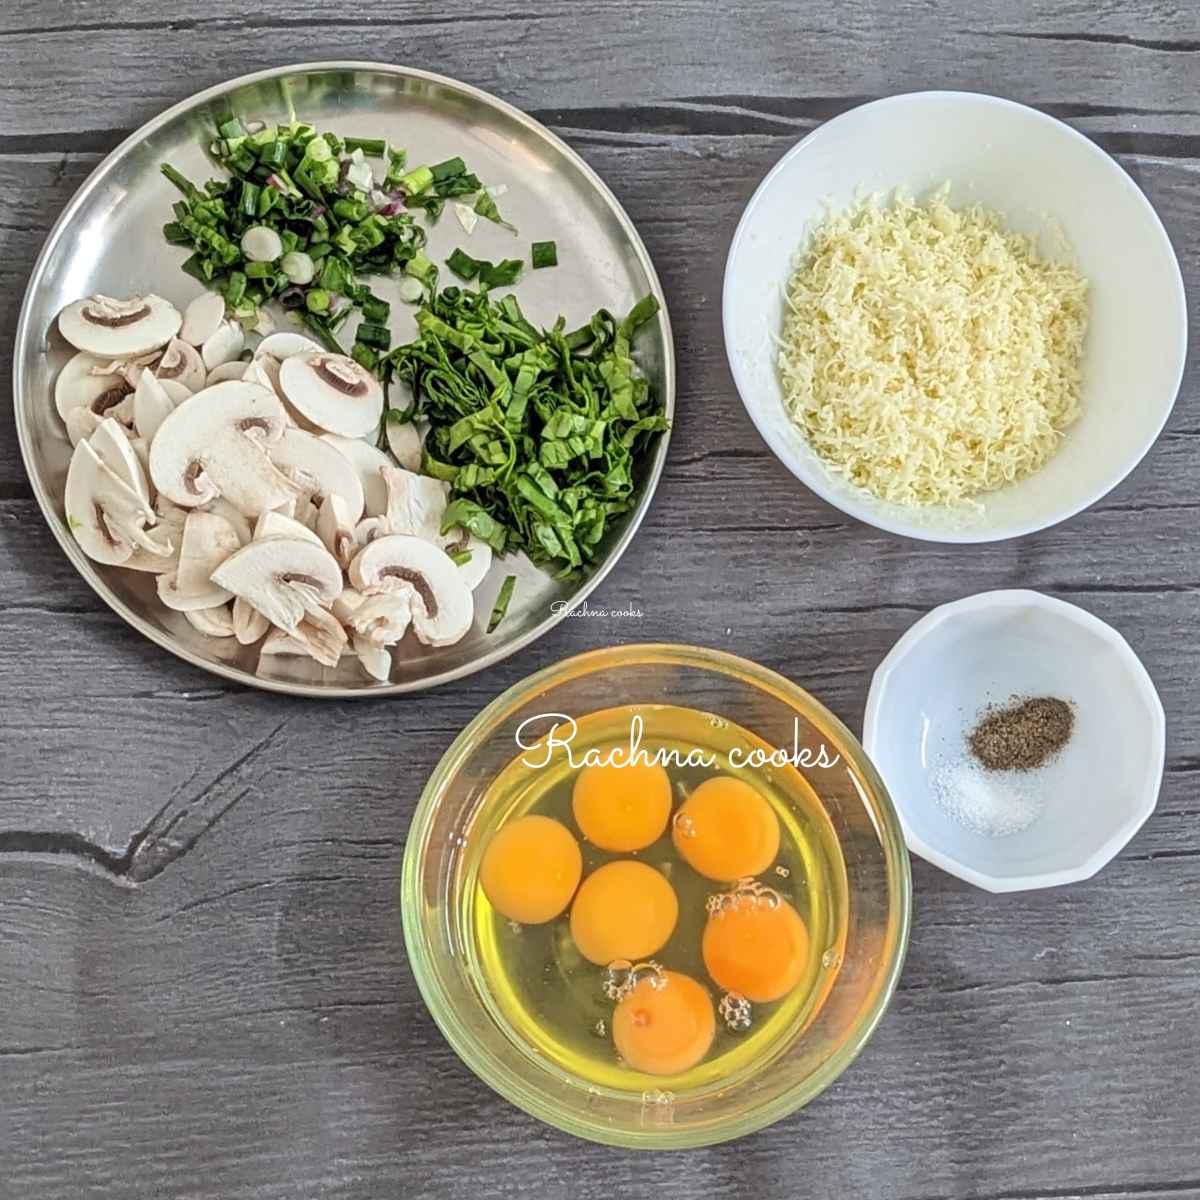 Ingredients for frittata in bowls: grated cheese, 6 broken eggs in a bowl, salt and pepper and chopped veggies in different bowls.